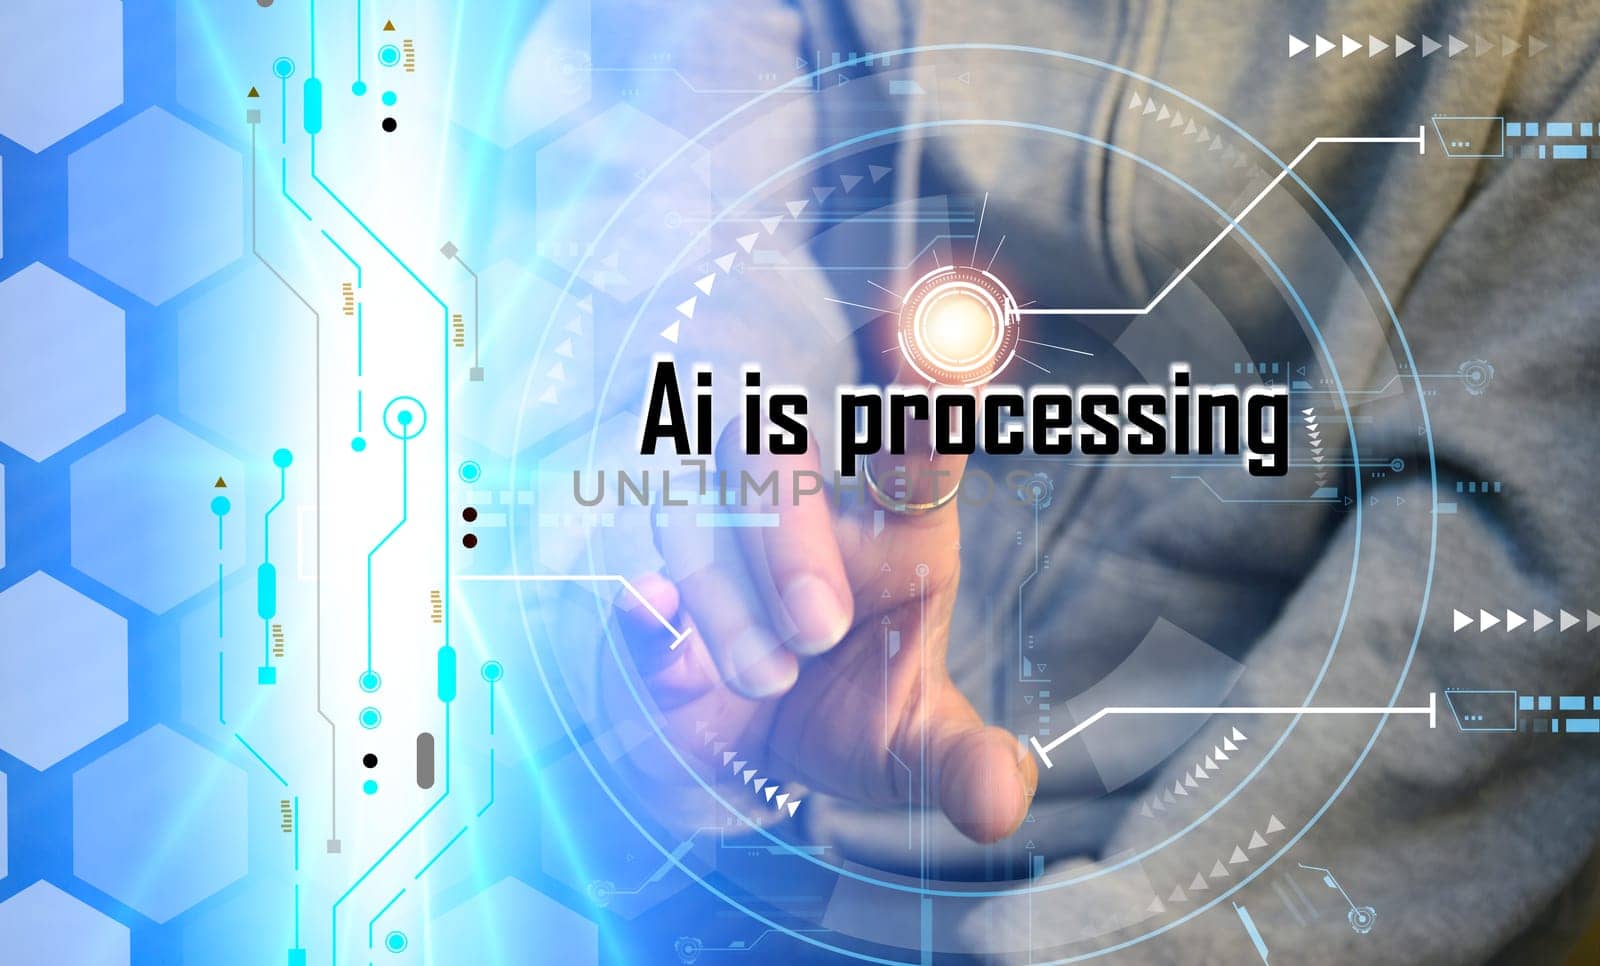 The concept of developing an artificial intelligence system that can interact with humans and be used in the industry 5.0 system.